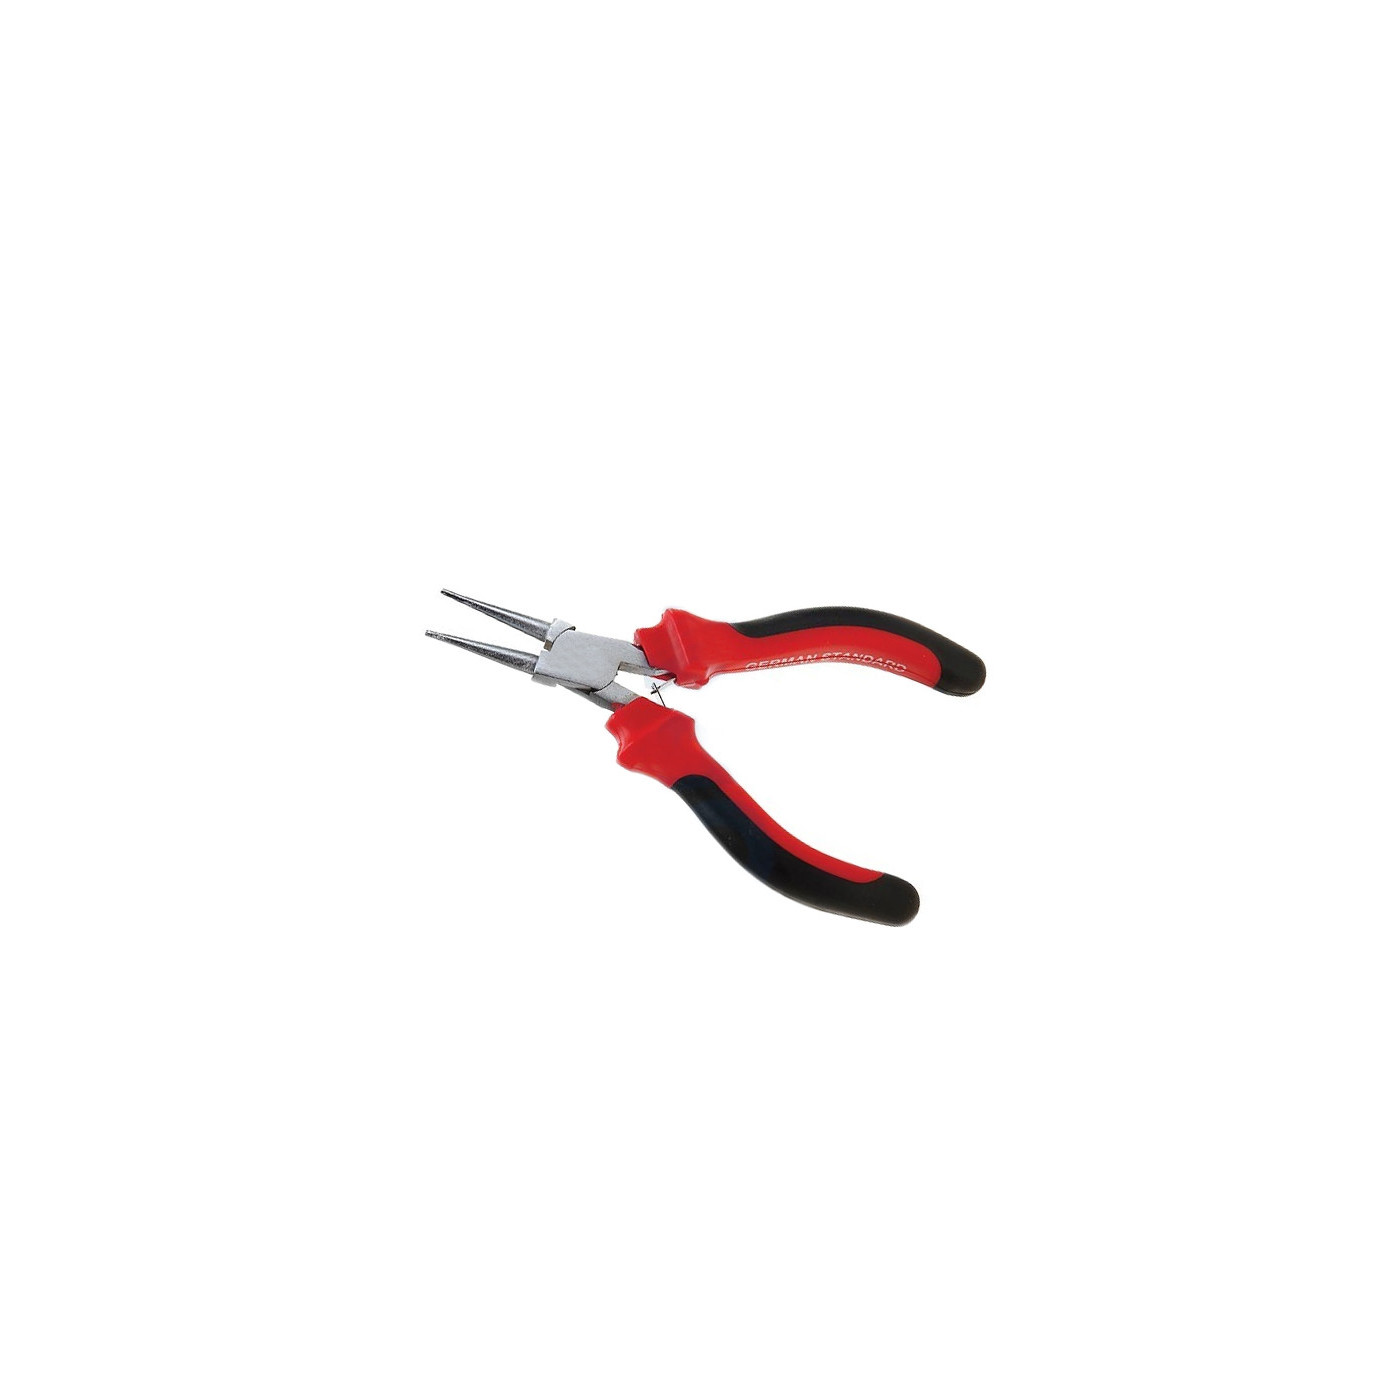 Small pliers round eyes (125 mm, for fine work)